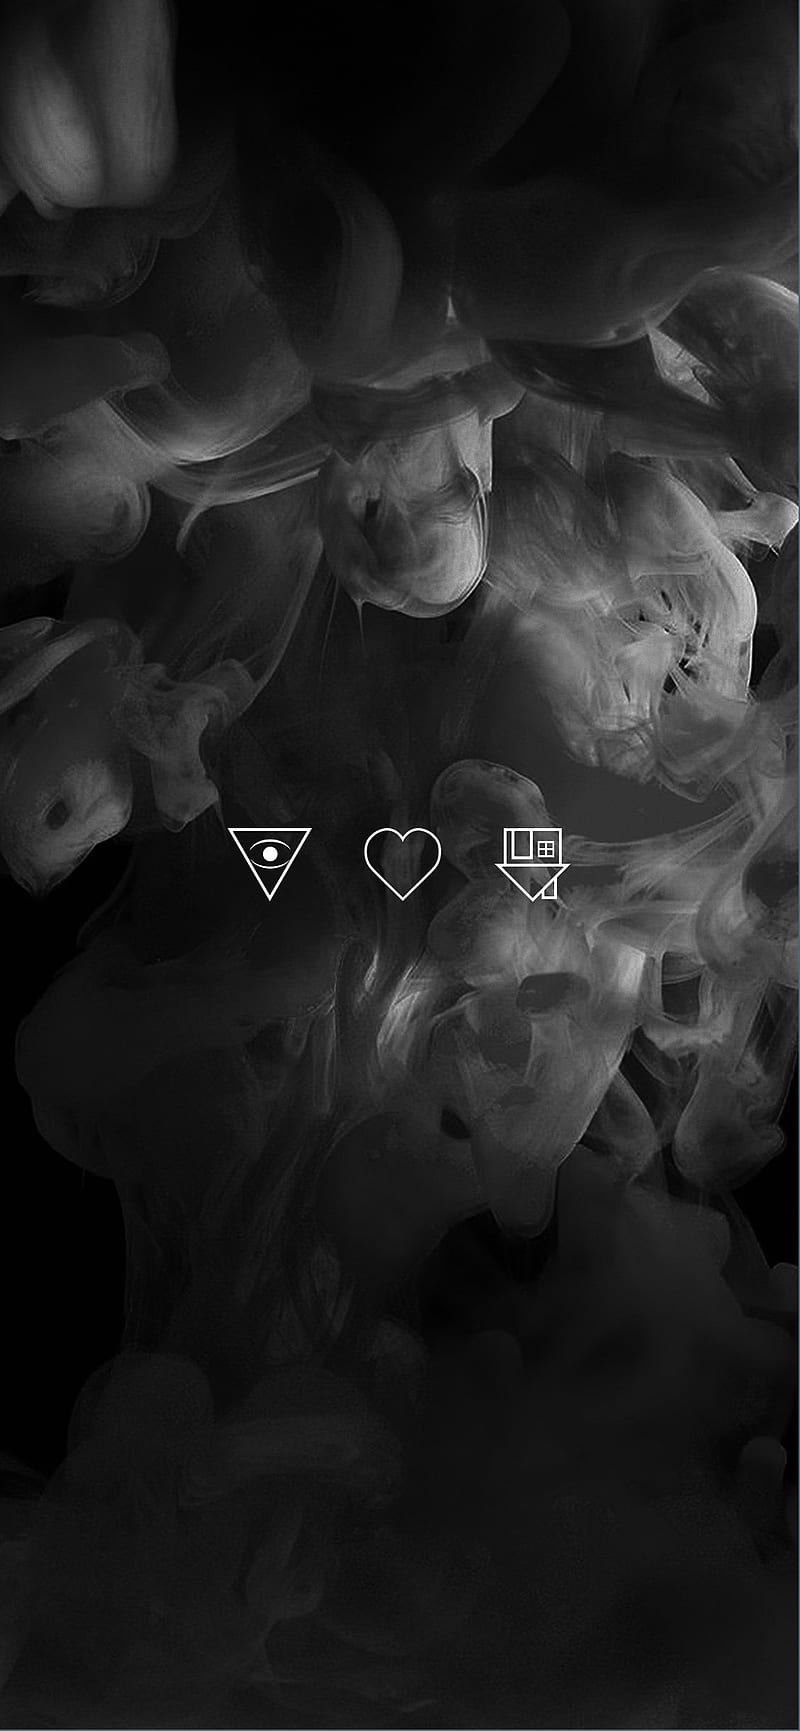 The Neighbourhood - Sweater Weather☆iphone spotify wallpaper☆By Rose:) in  2023